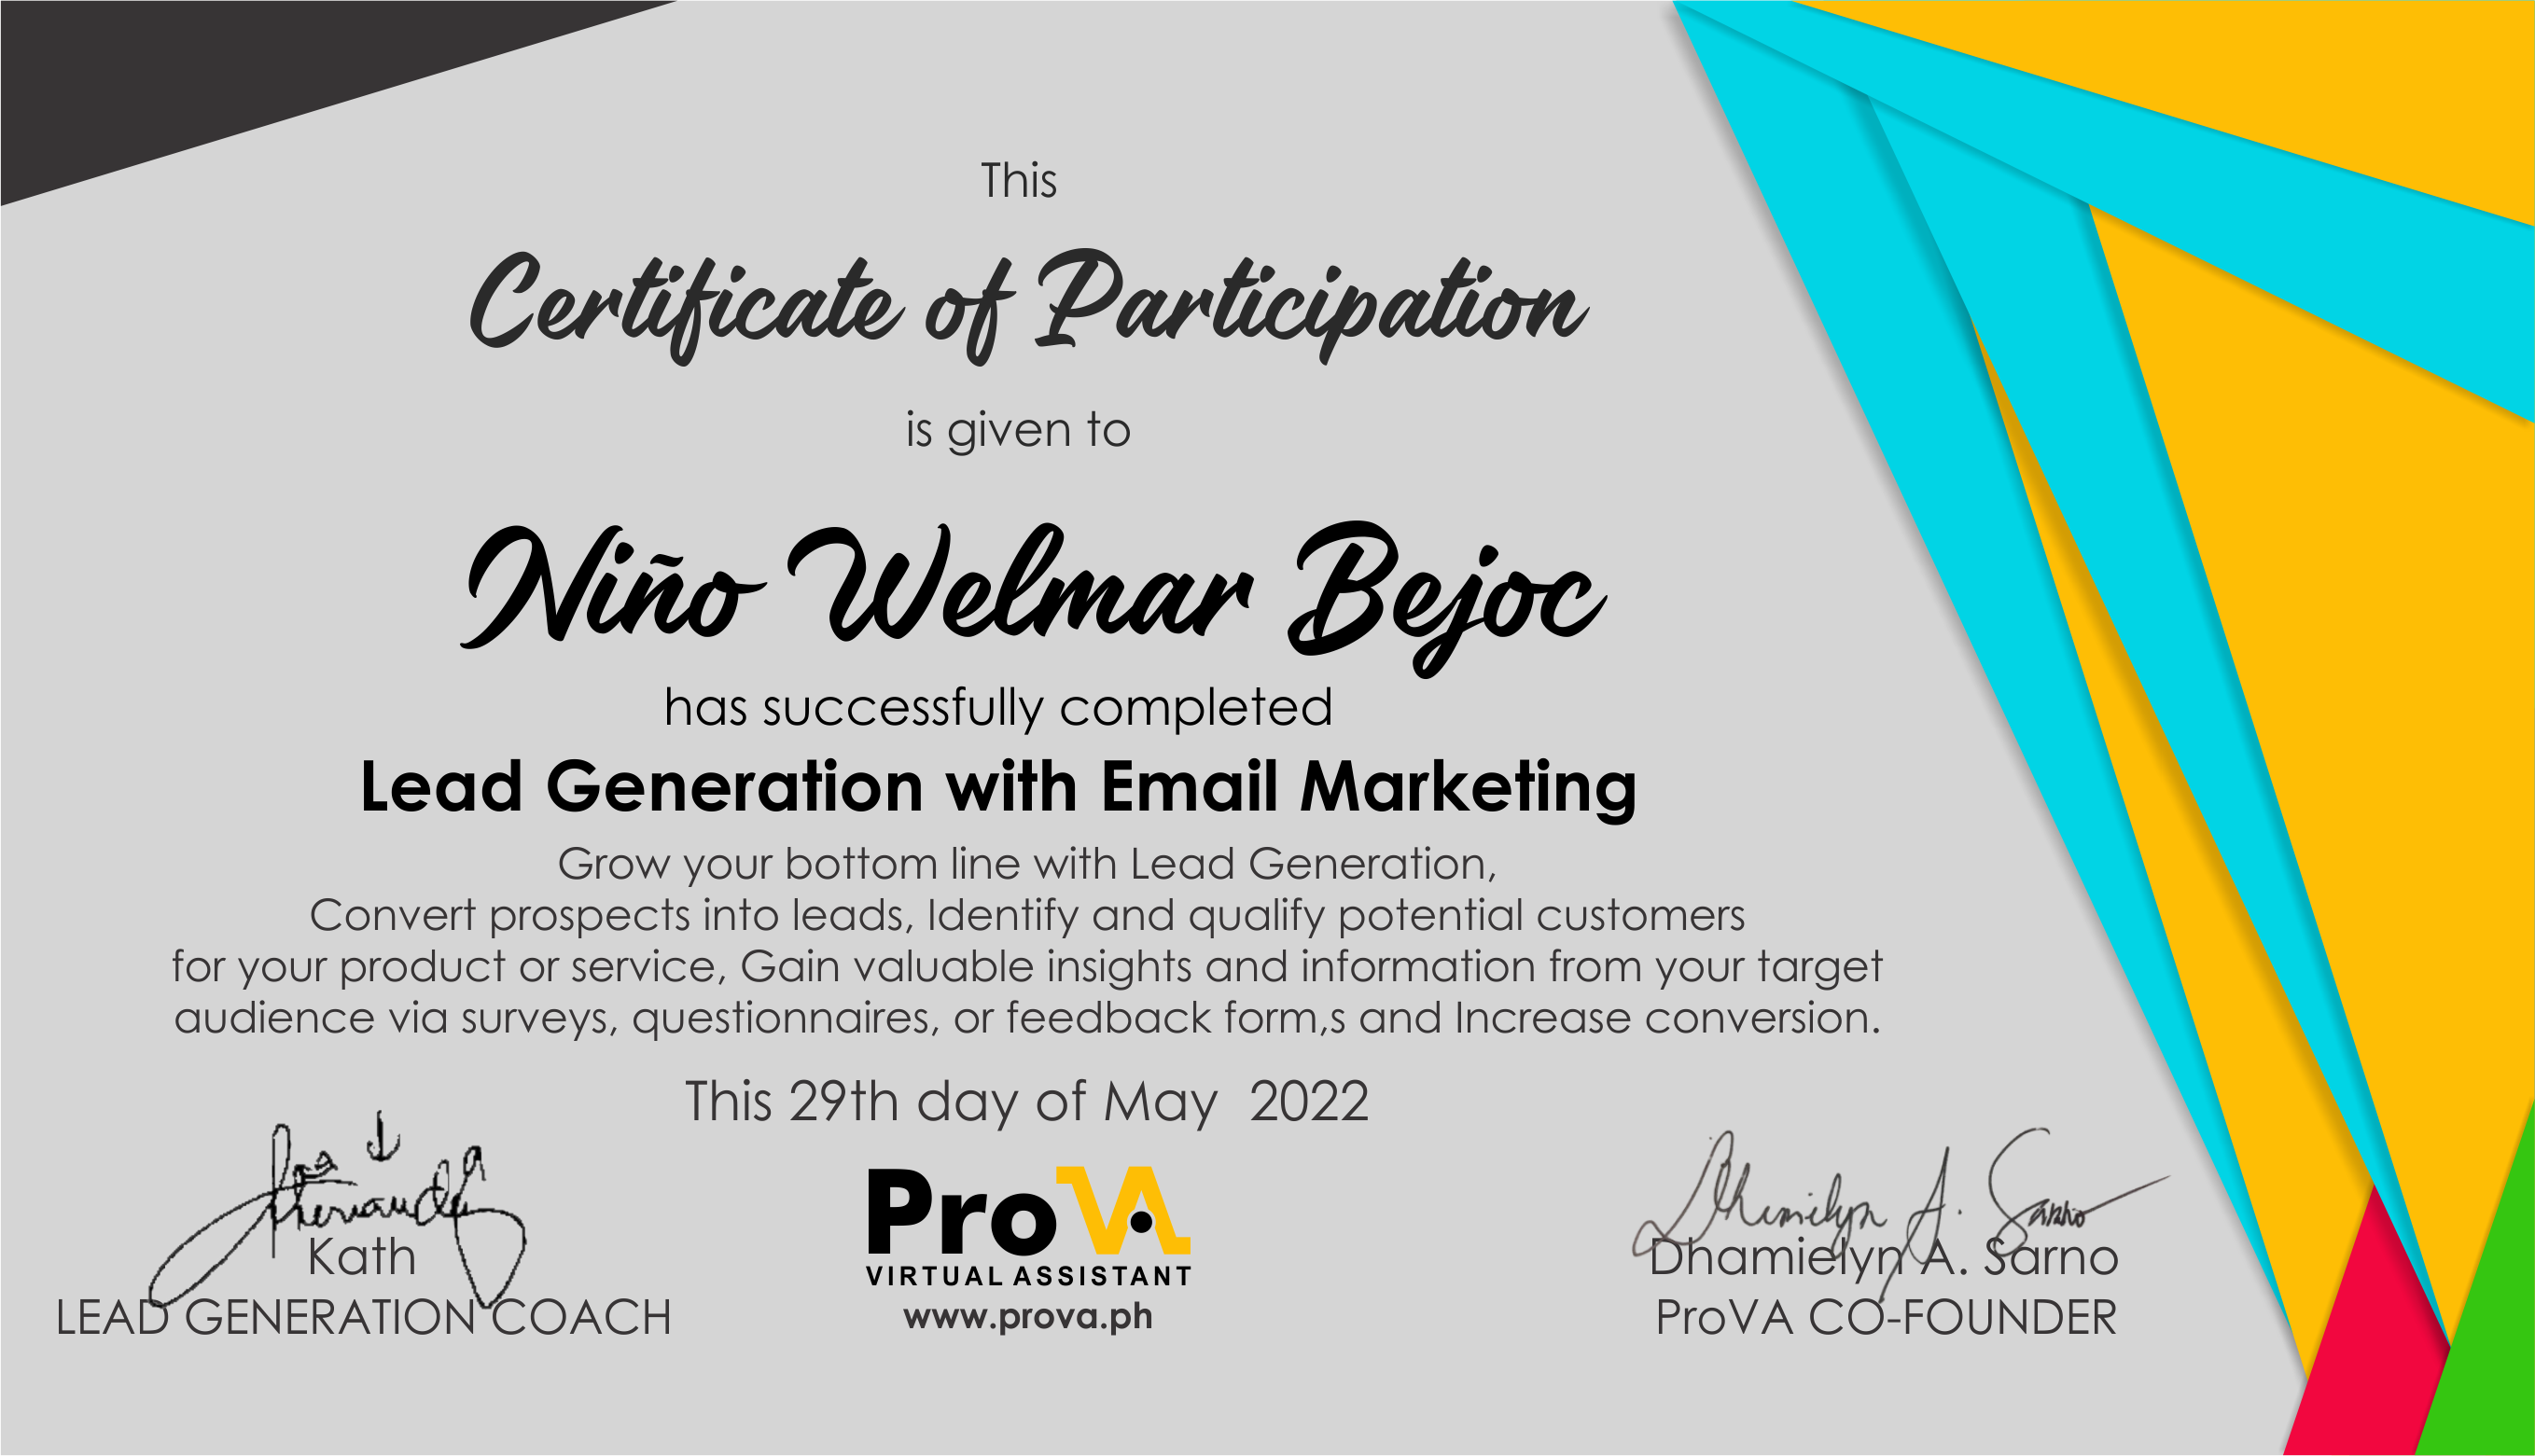 Lead Generation with Email Marketing